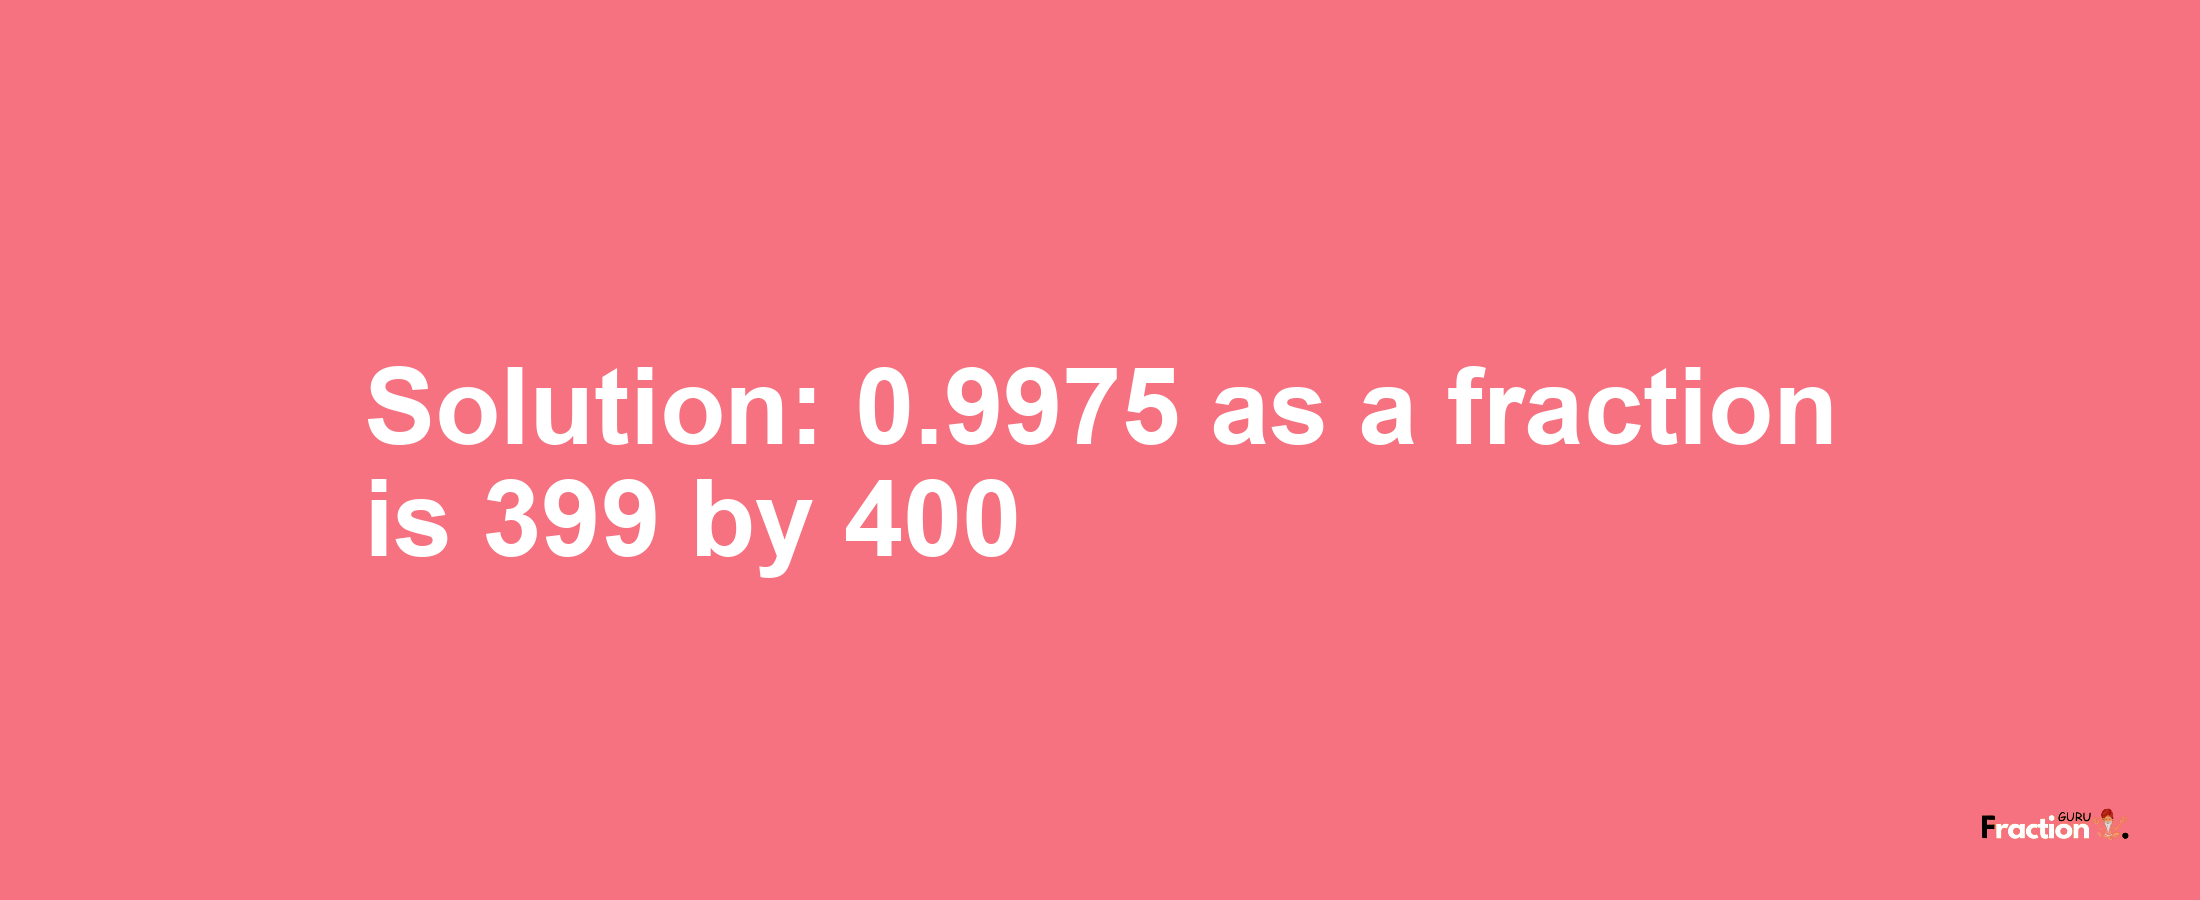 Solution:0.9975 as a fraction is 399/400